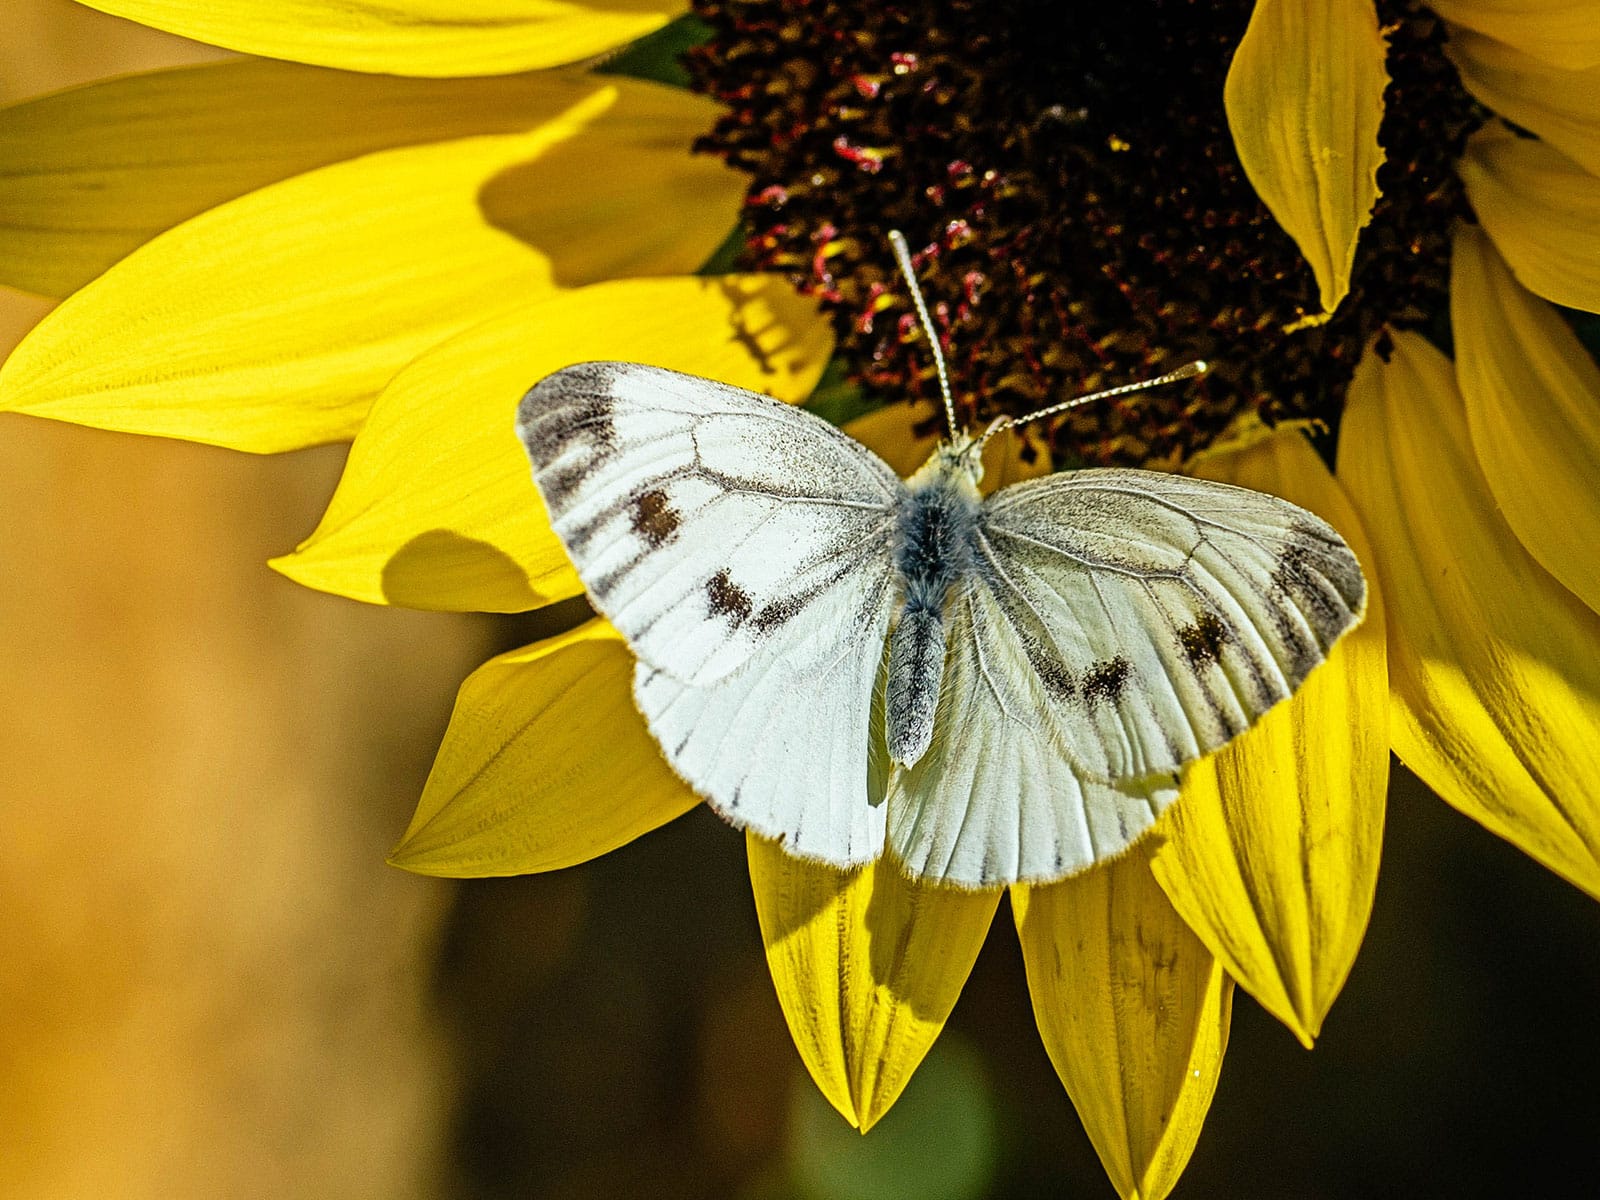 Cabbage white butterfly on a yellow sunflower